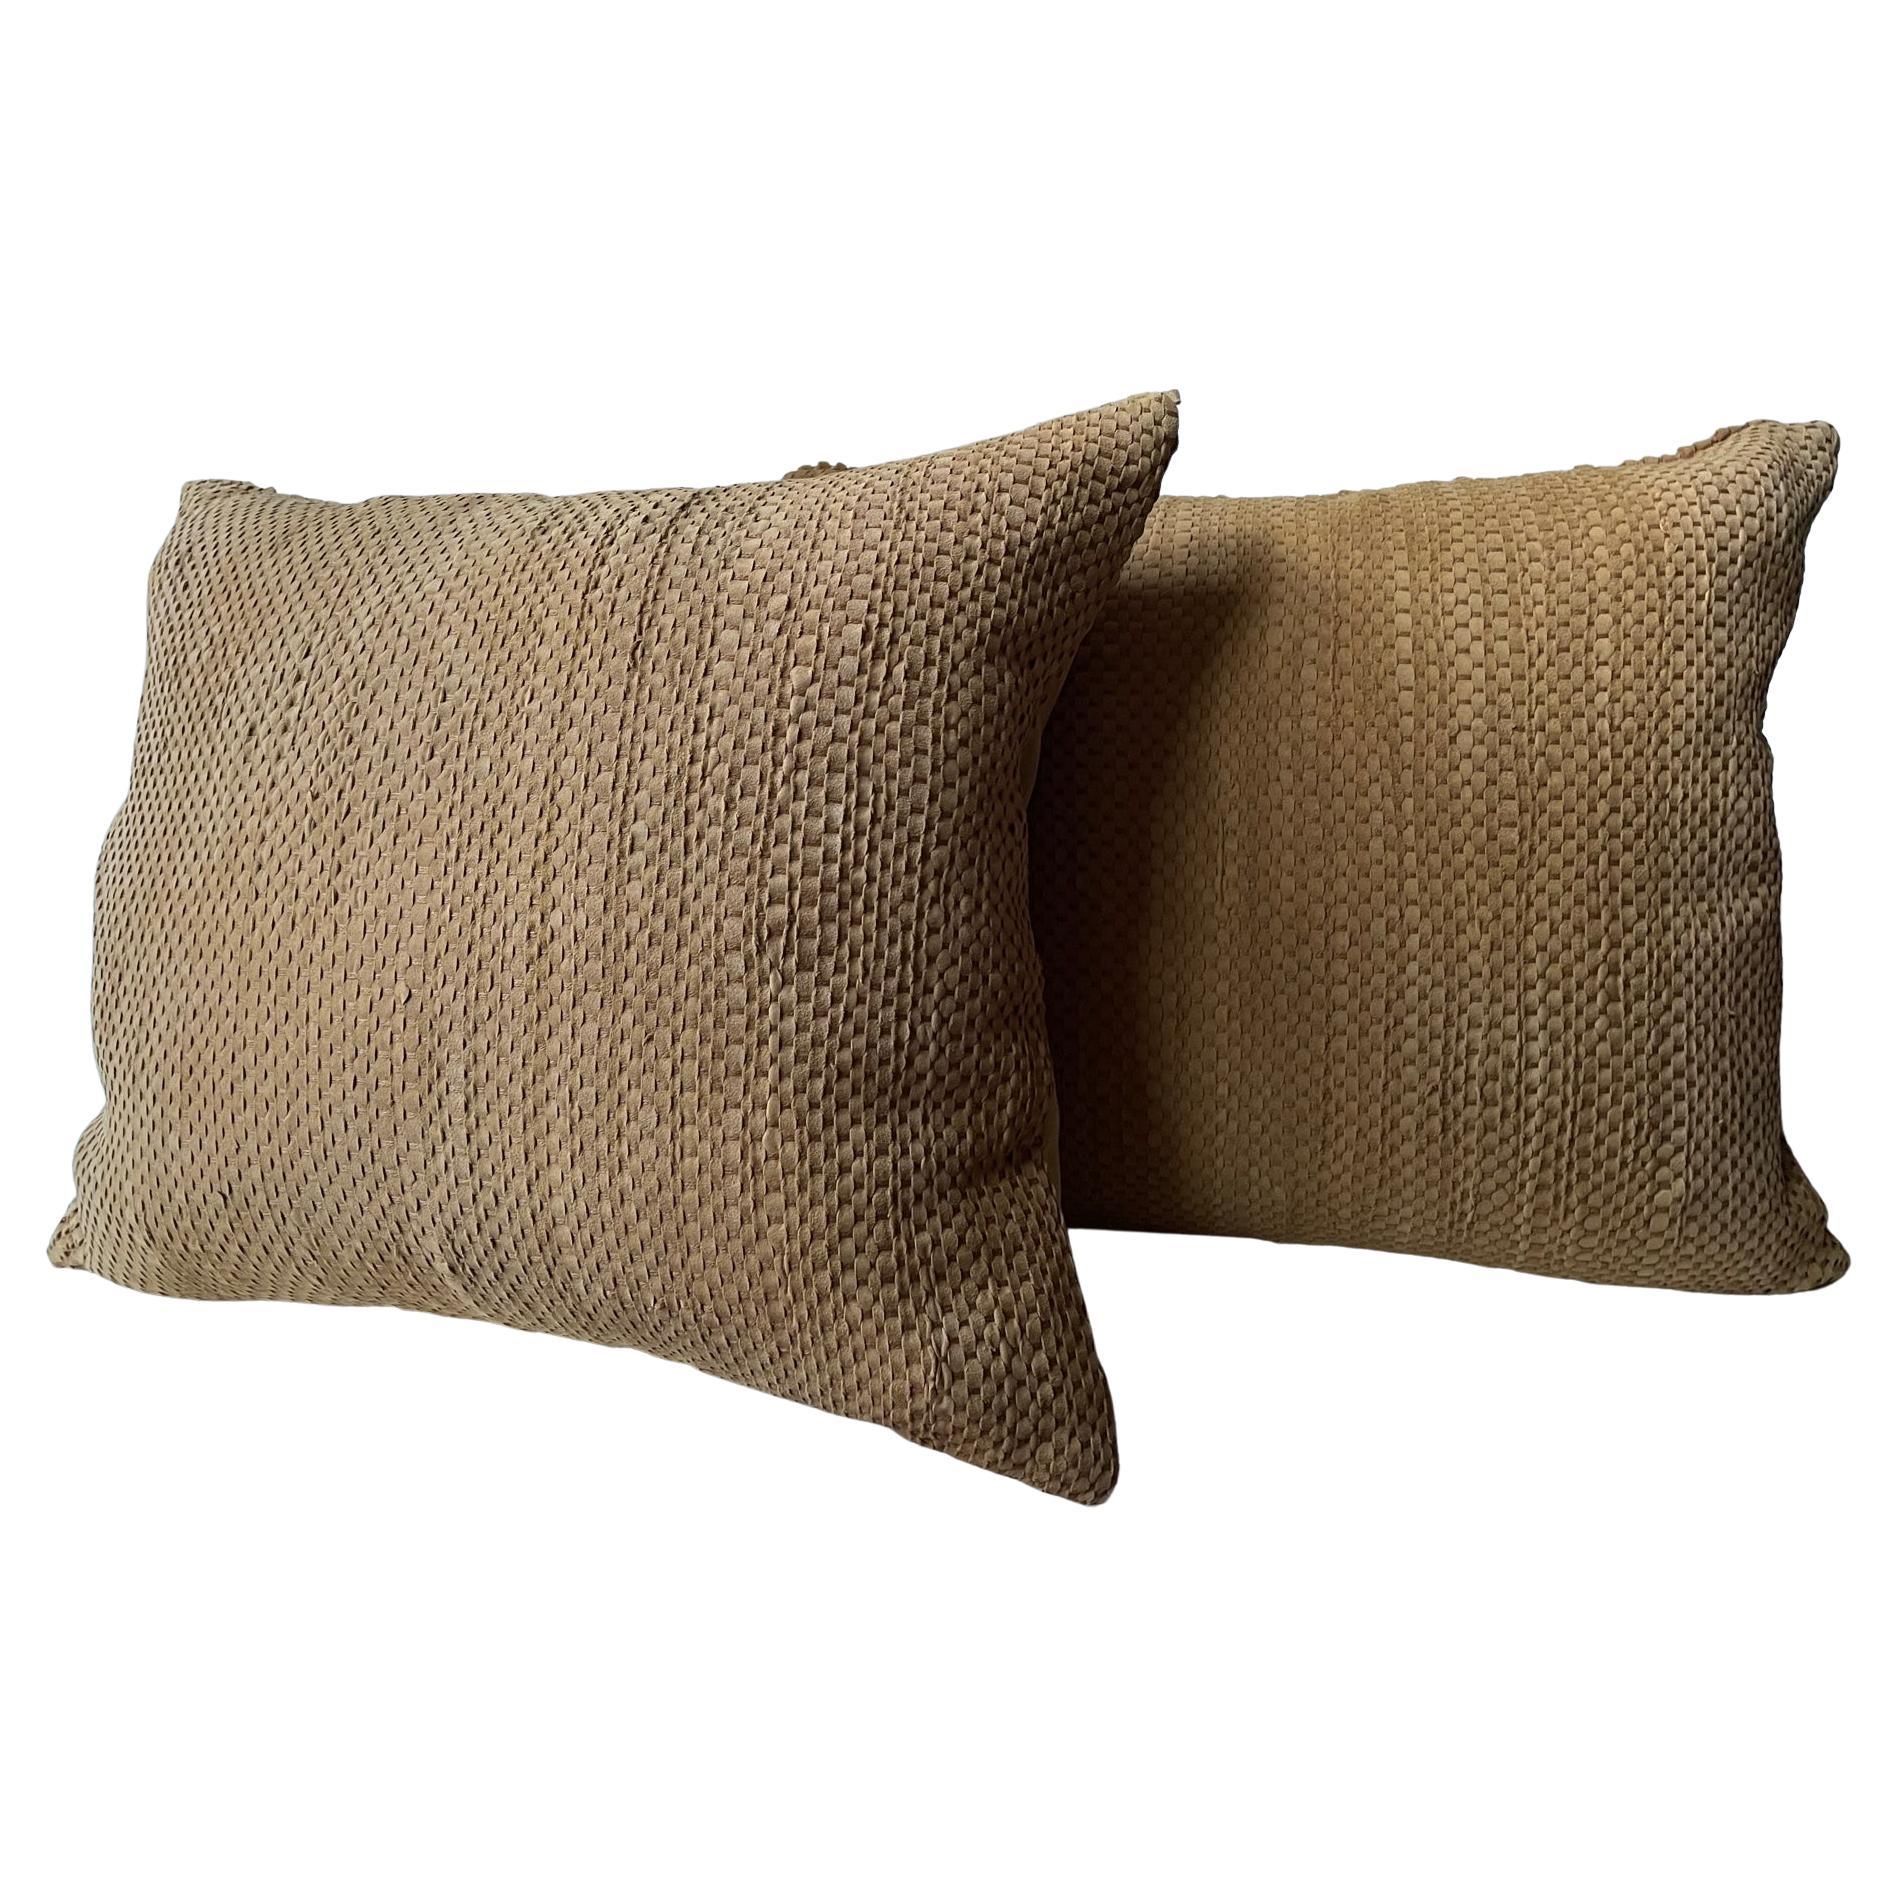 Pair Hand Woven Suede Cushions Colour Ginger Square Shaped